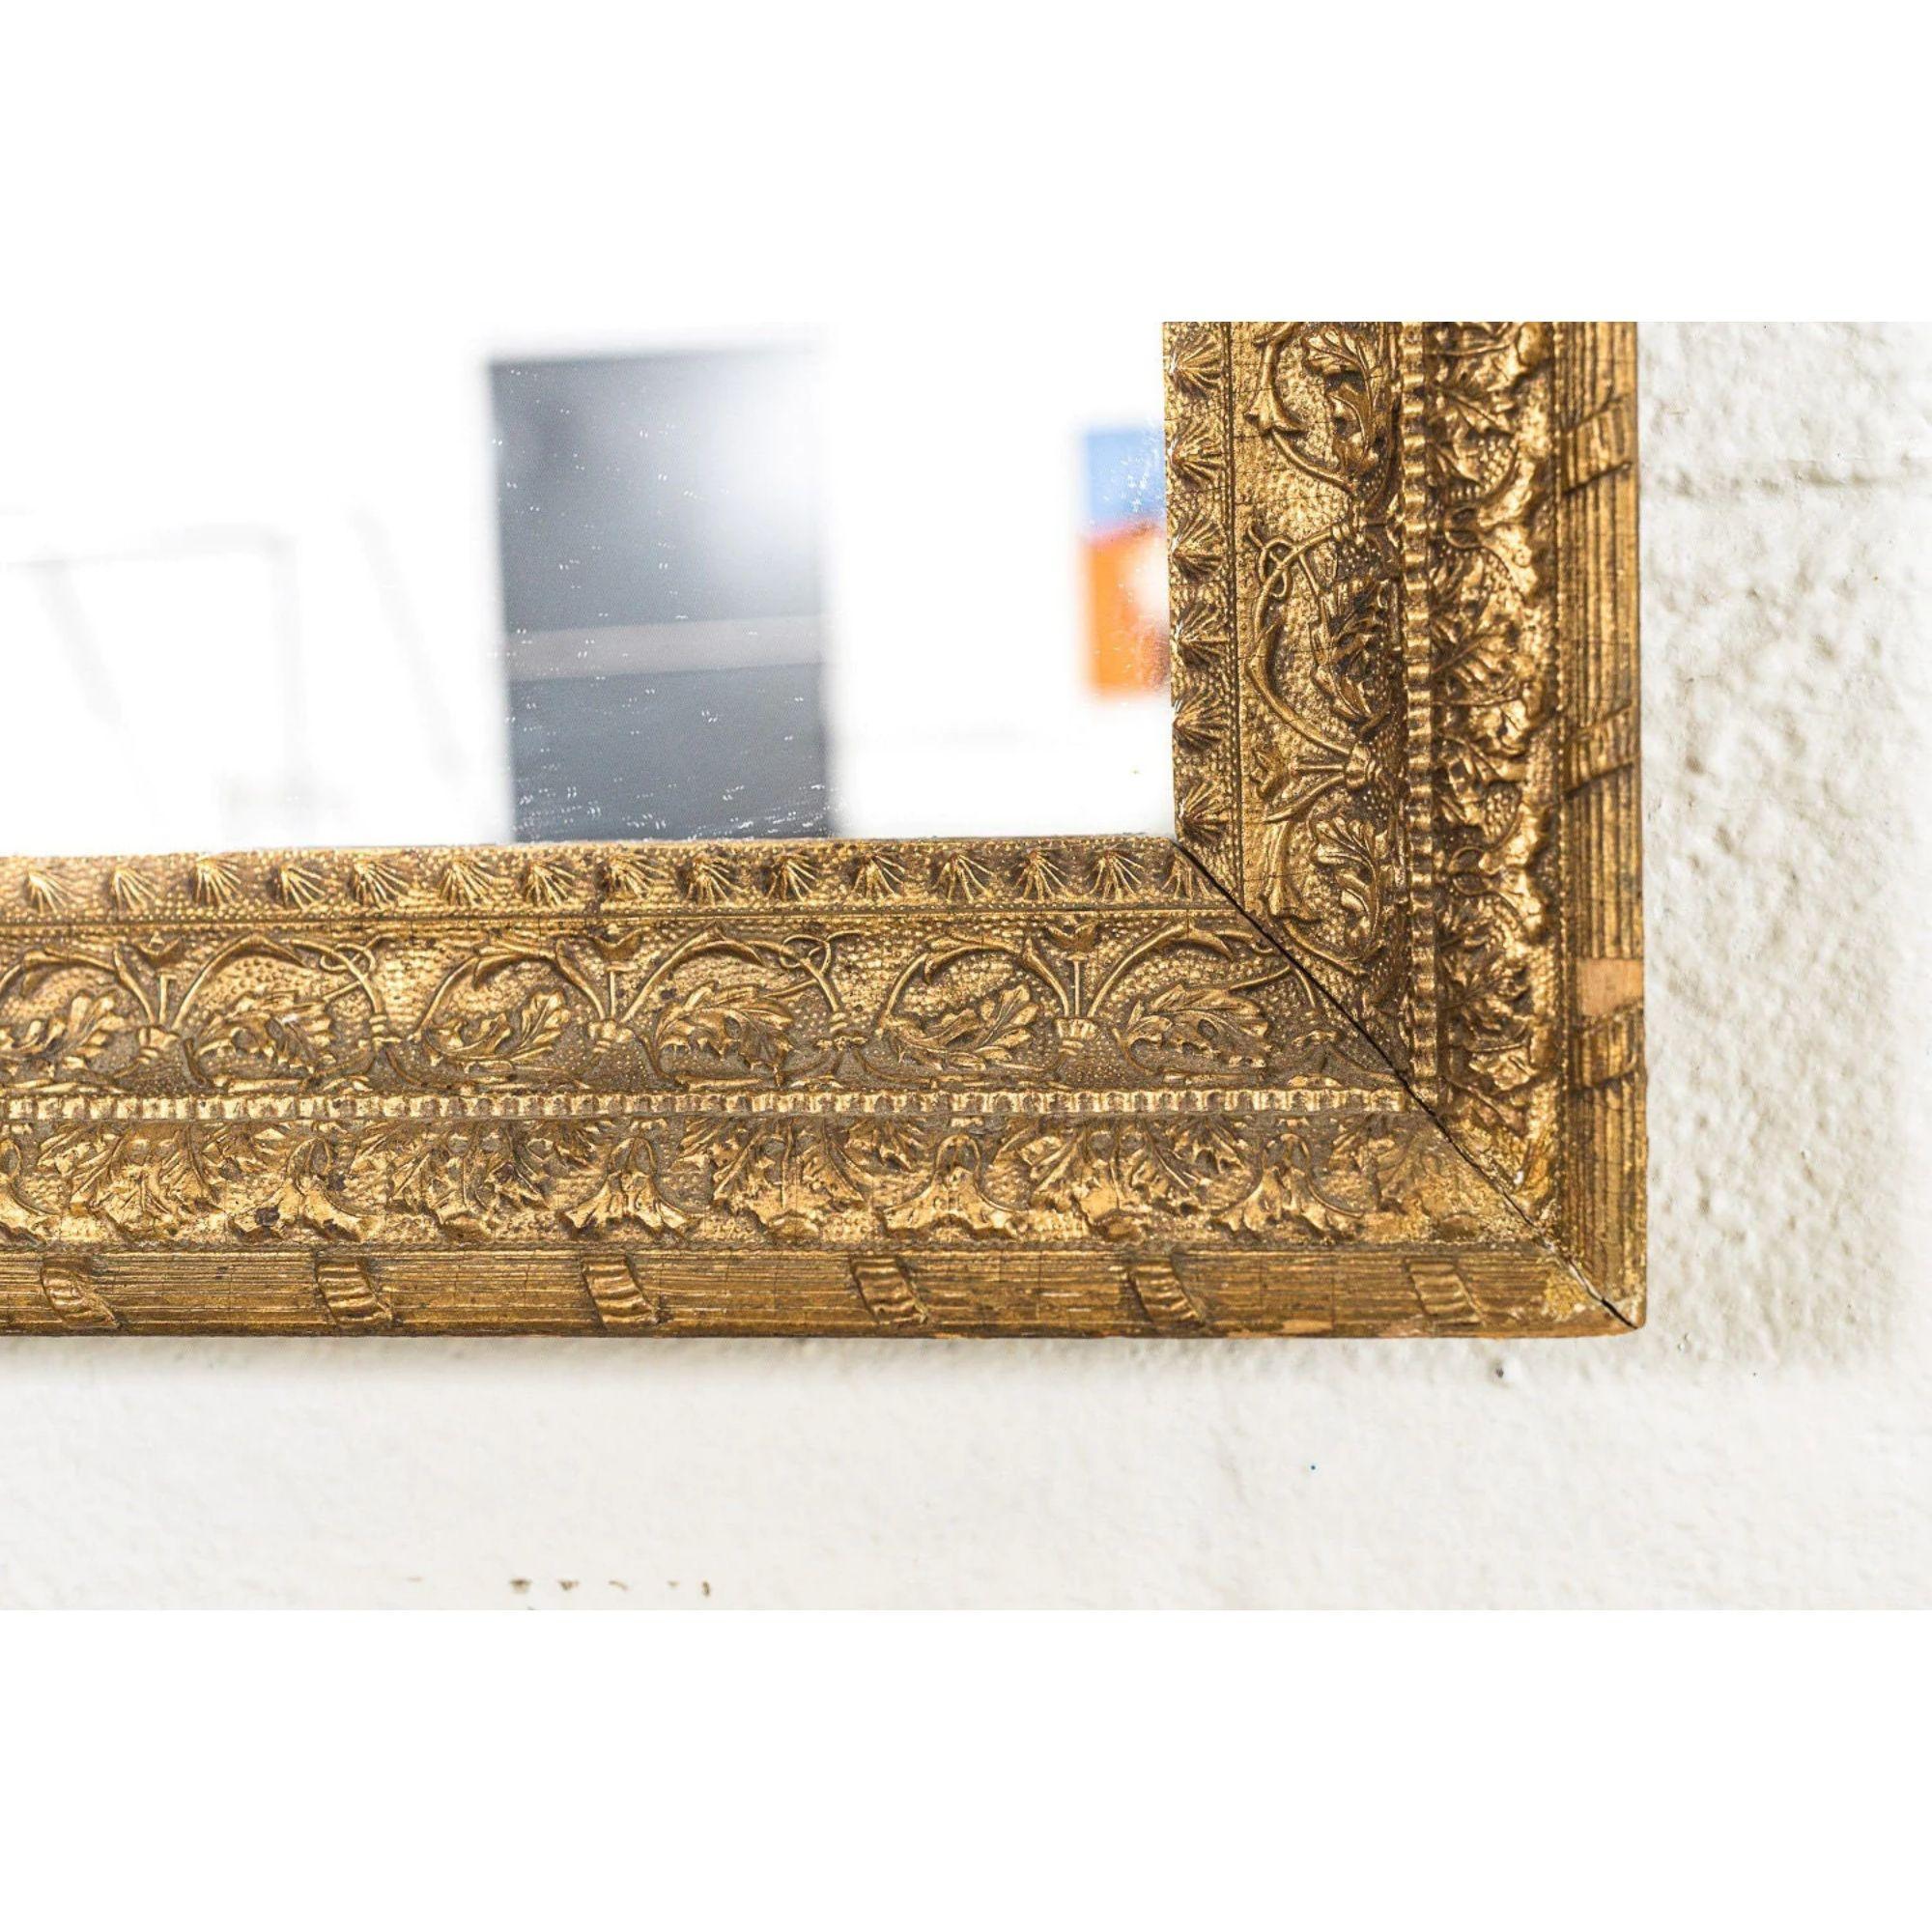 Wood Vintage Antique Ornate Gold Decorative Hanging Wall Mirror For Sale